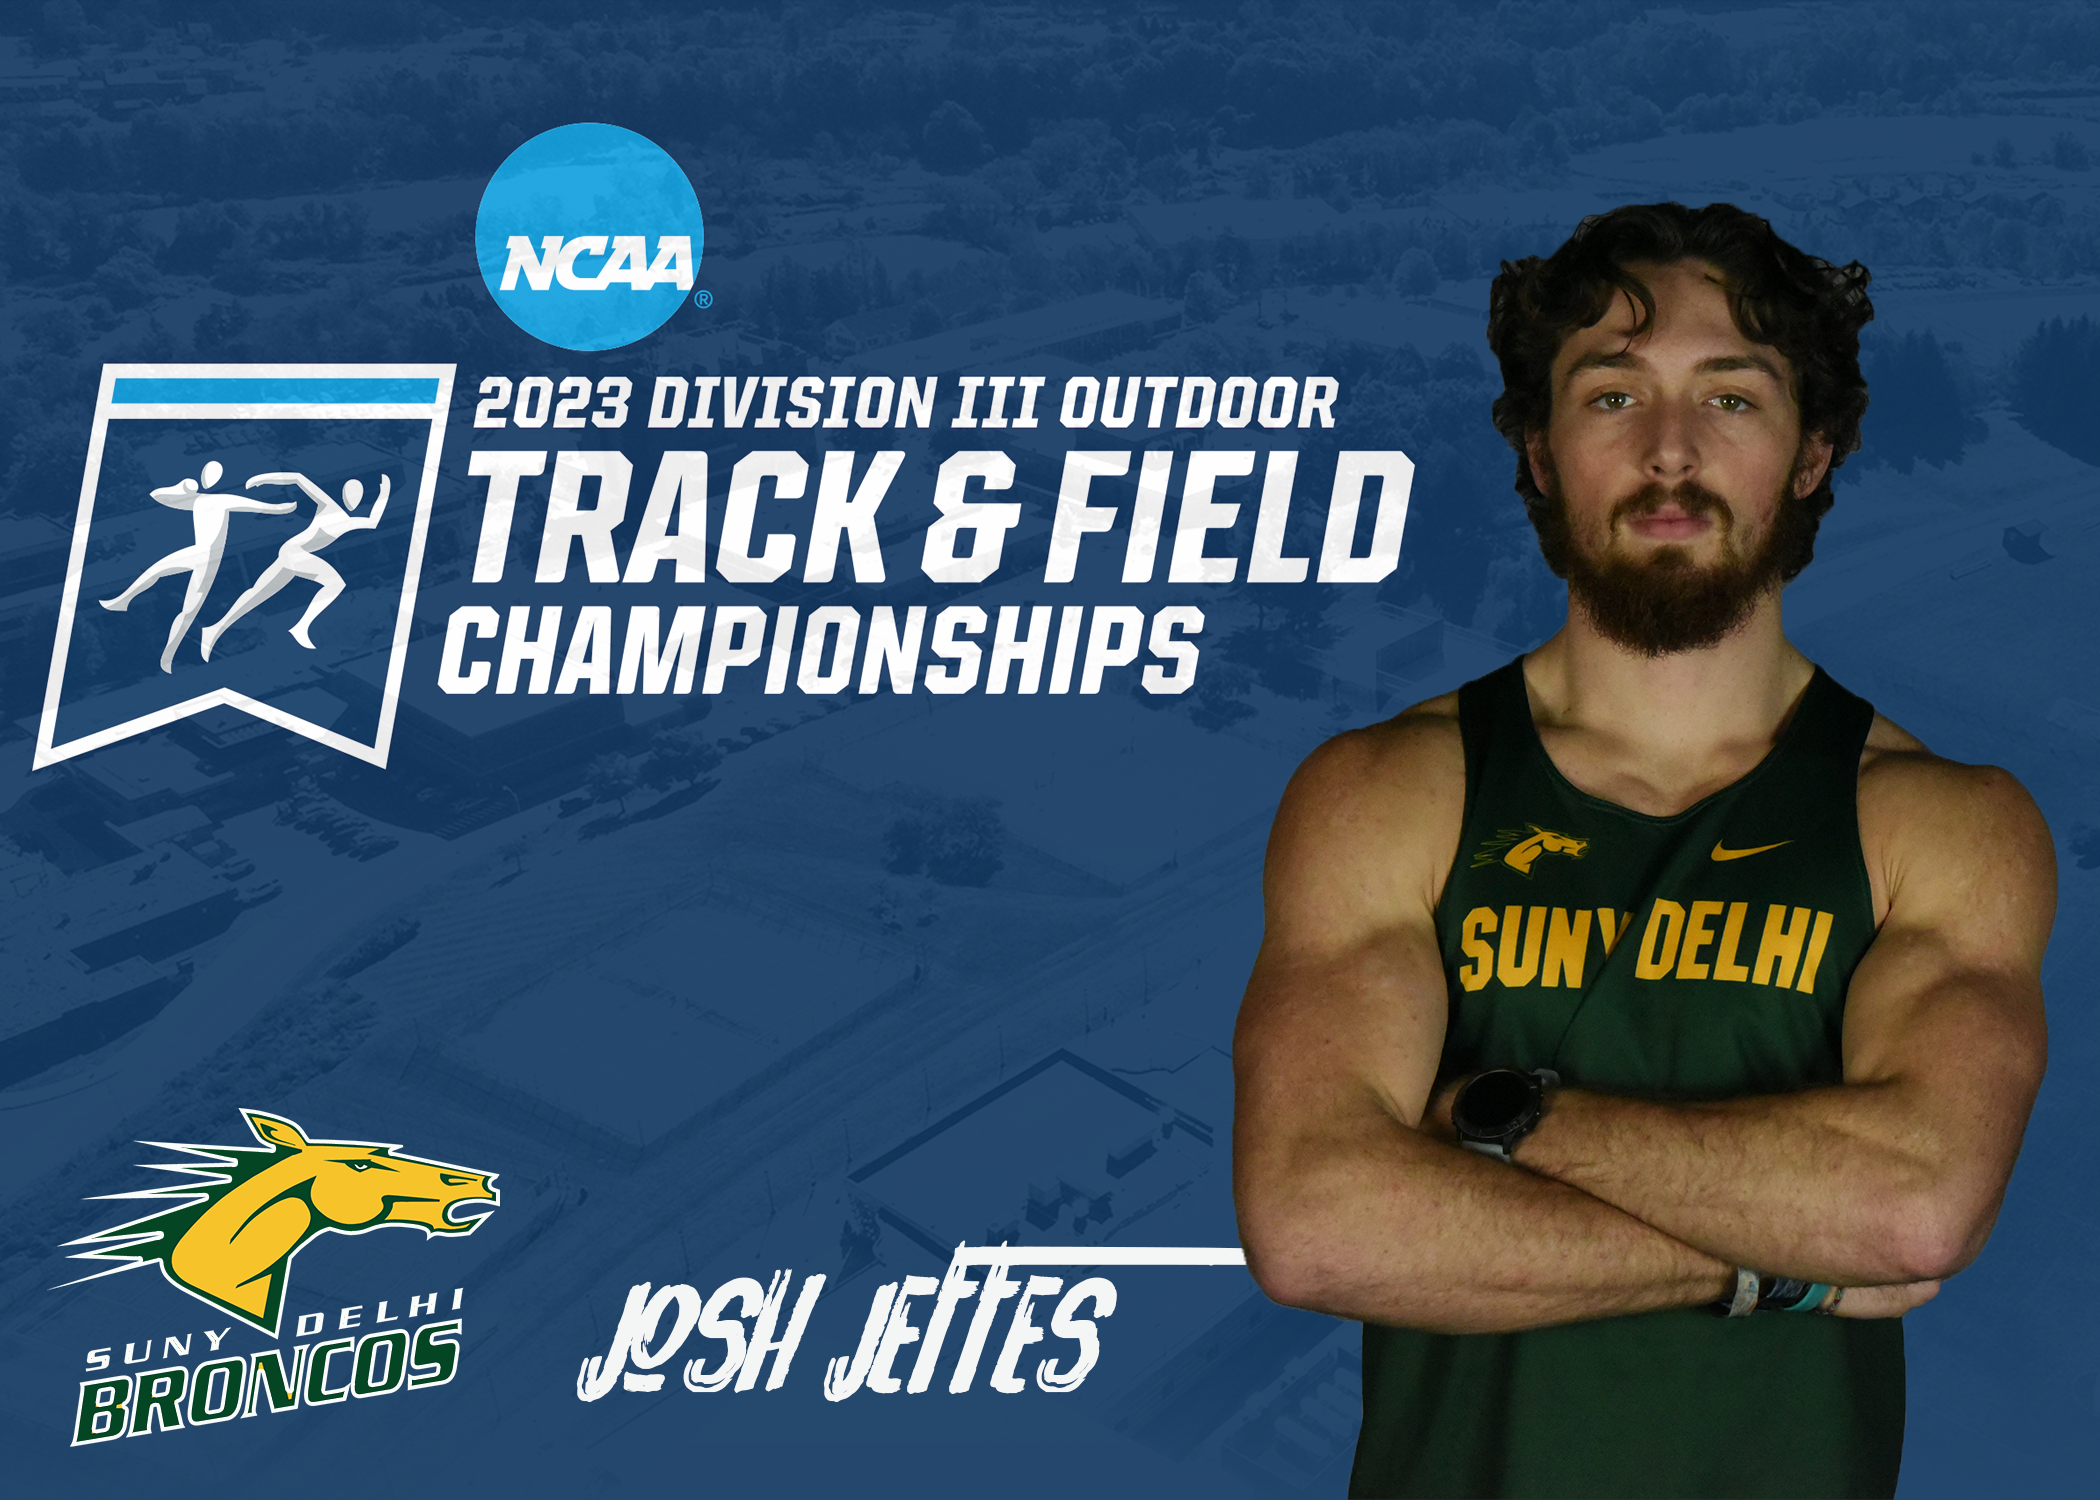 Junior Josh Jeffes gears up for NCAA Division III Outdoor Track & Field Championships